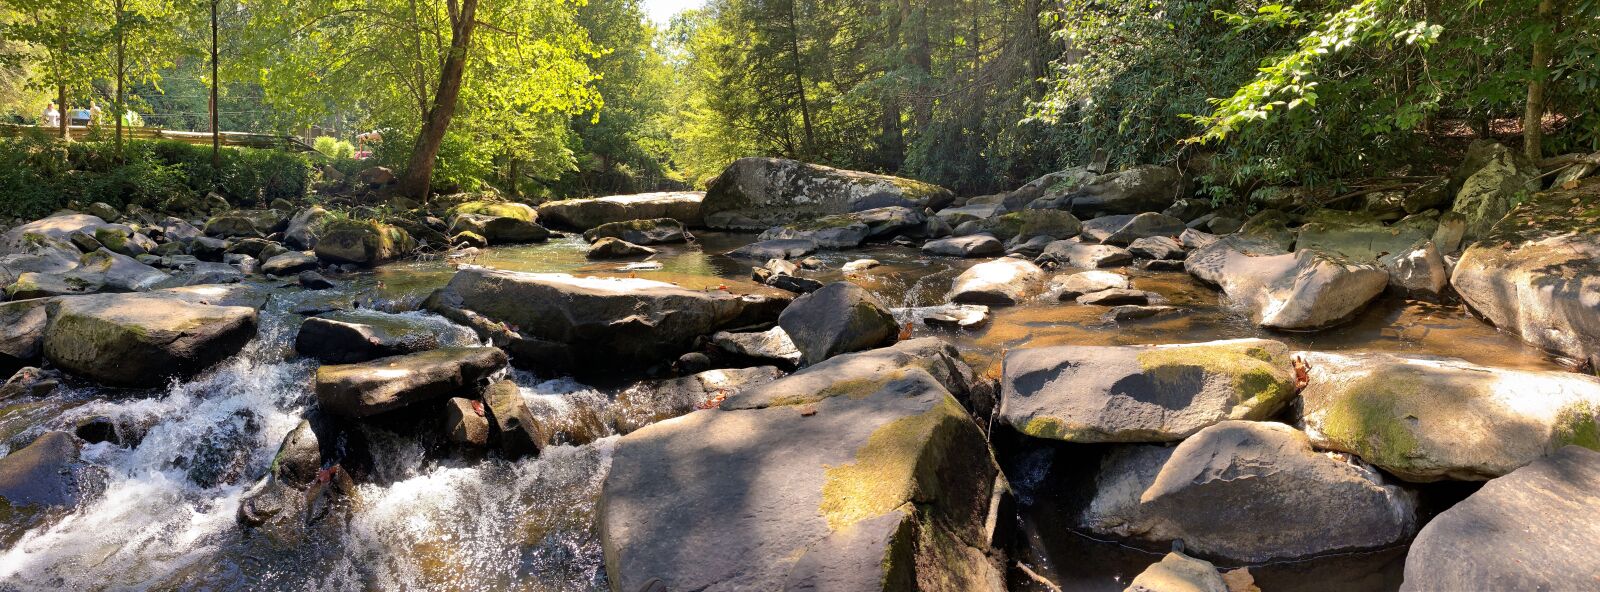 iPhone XS Max back camera 4.25mm f/1.8 sample photo. Paint creek, west virginia photography